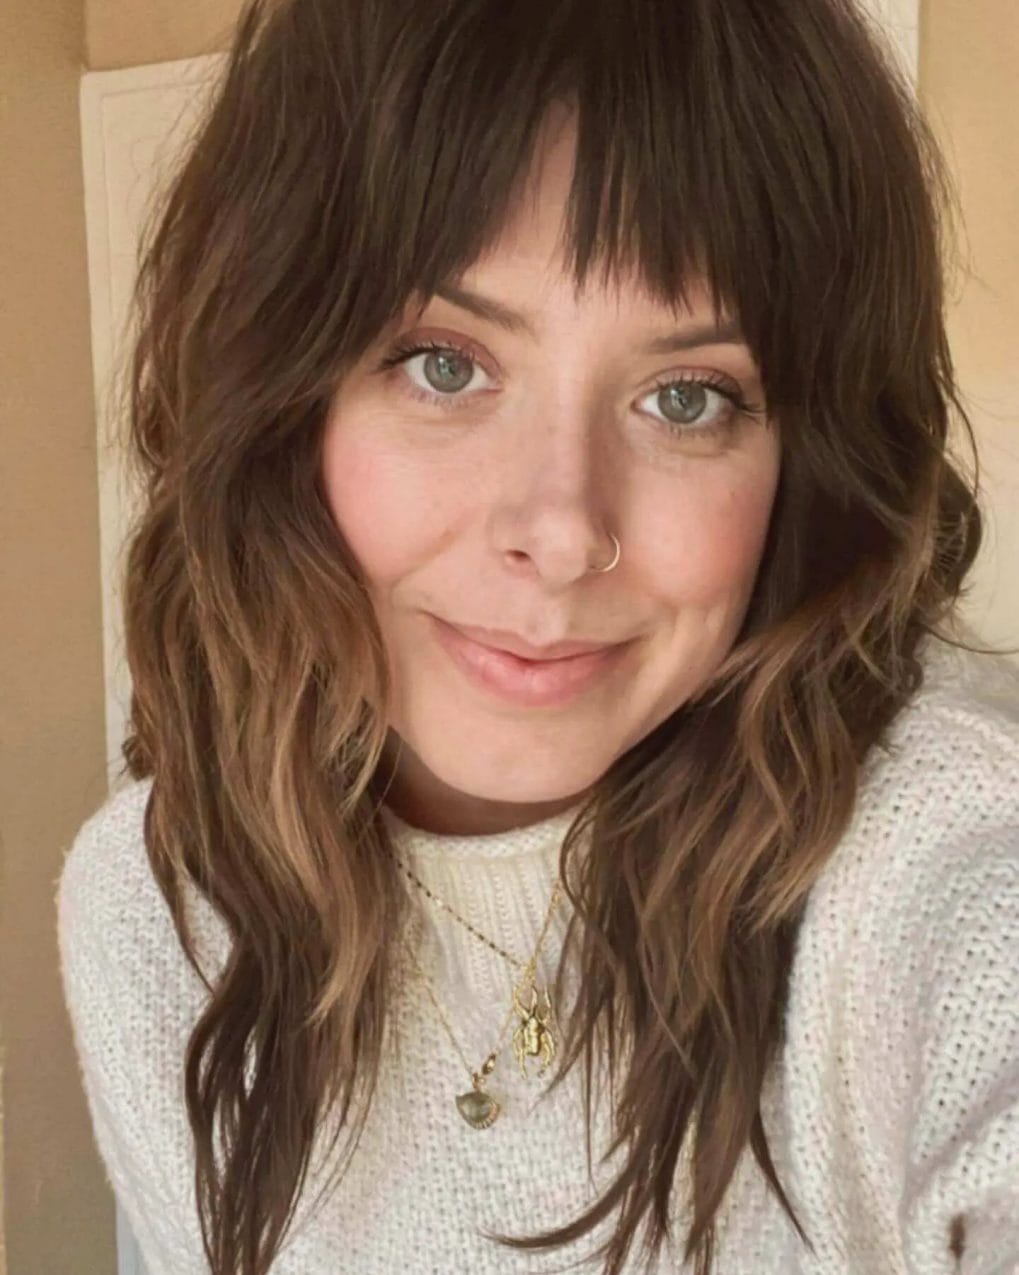 Chestnut balayage waves with choppy, textured bangs